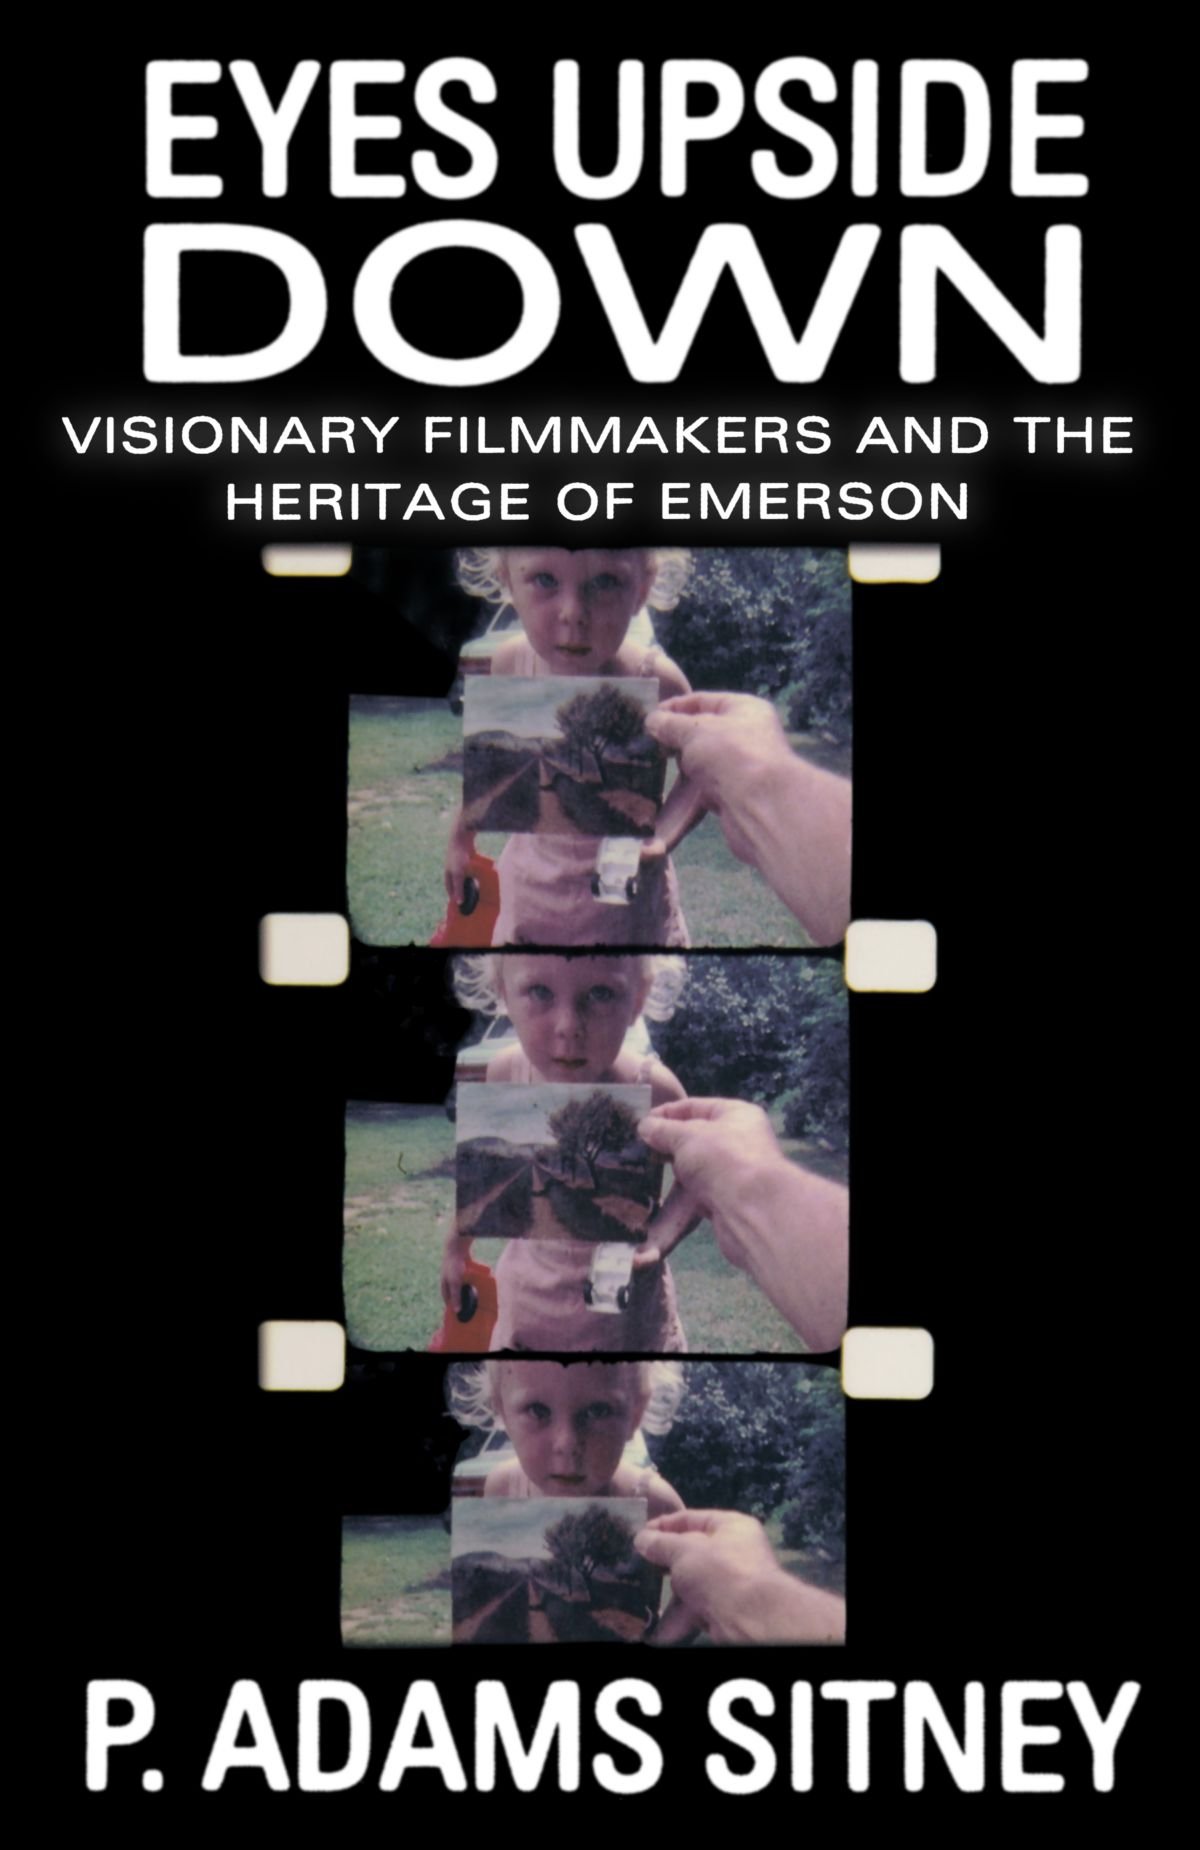 Eyes Upside Down: Visonary Filmmakers and the Heritage of Emerson